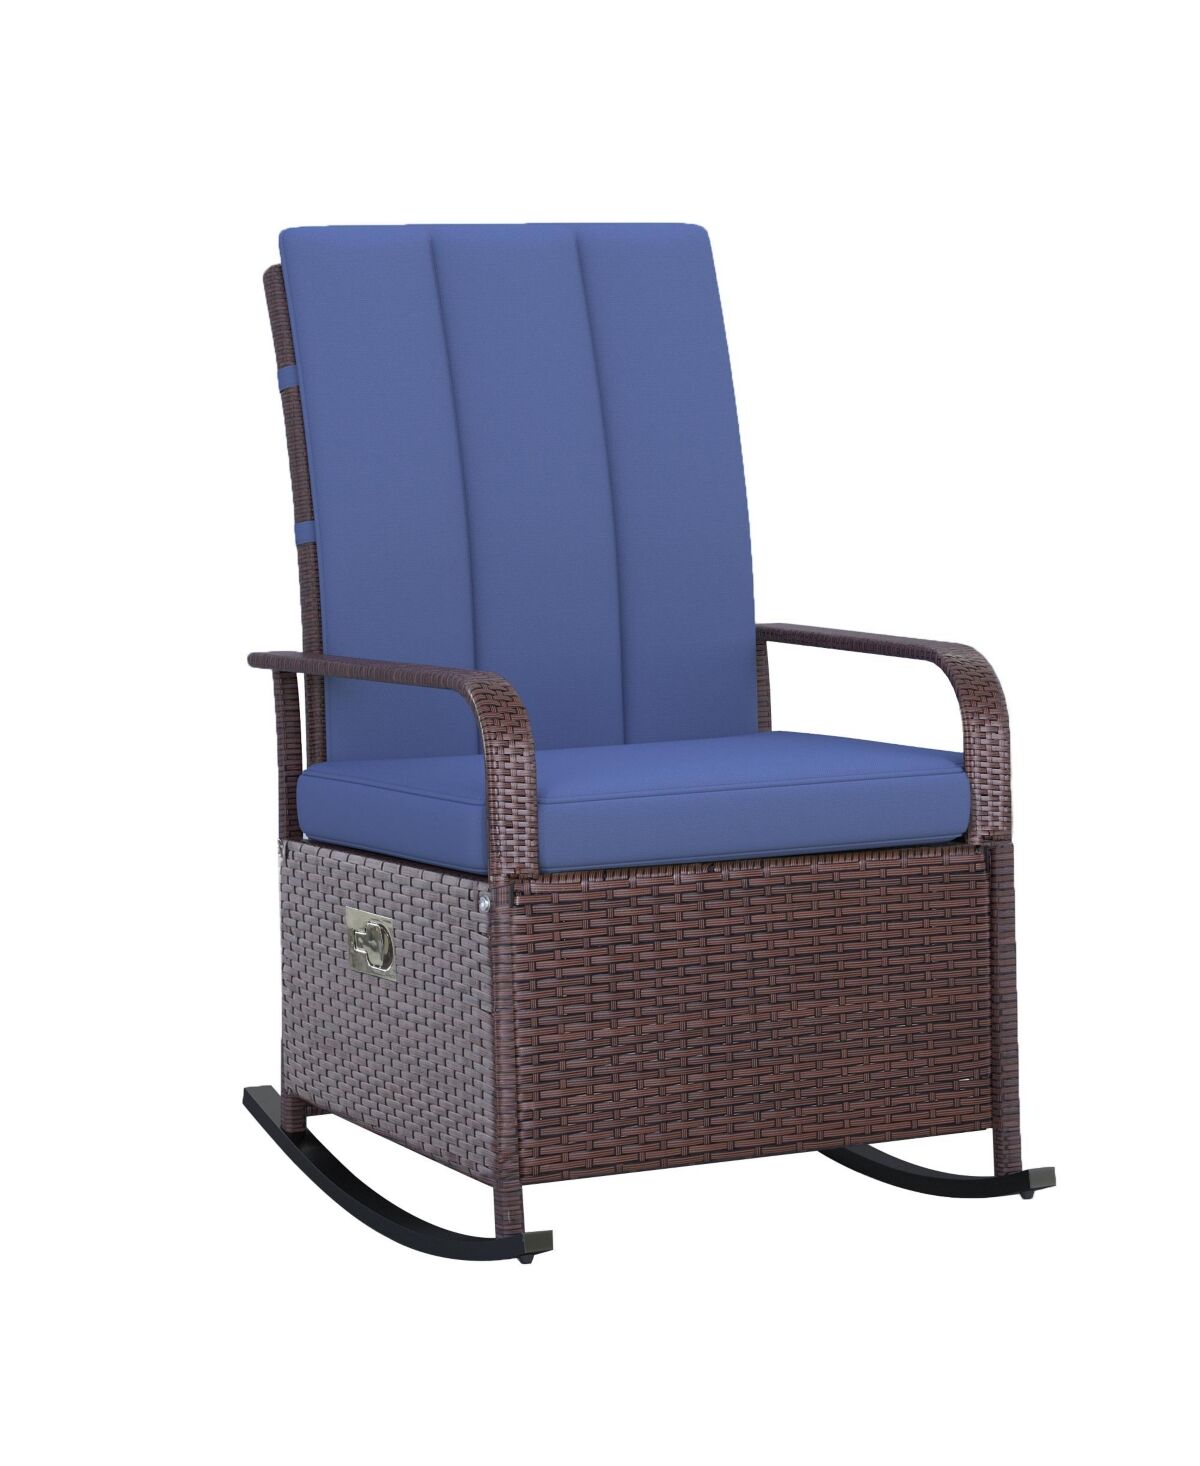 Outsunny Outdoor Rattan Wicker Rocking Chair Patio Recliner with Soft Cushion, Adjustable Footrest, Max. 135 Degree Backrest, Blue - Mixed brown/dark